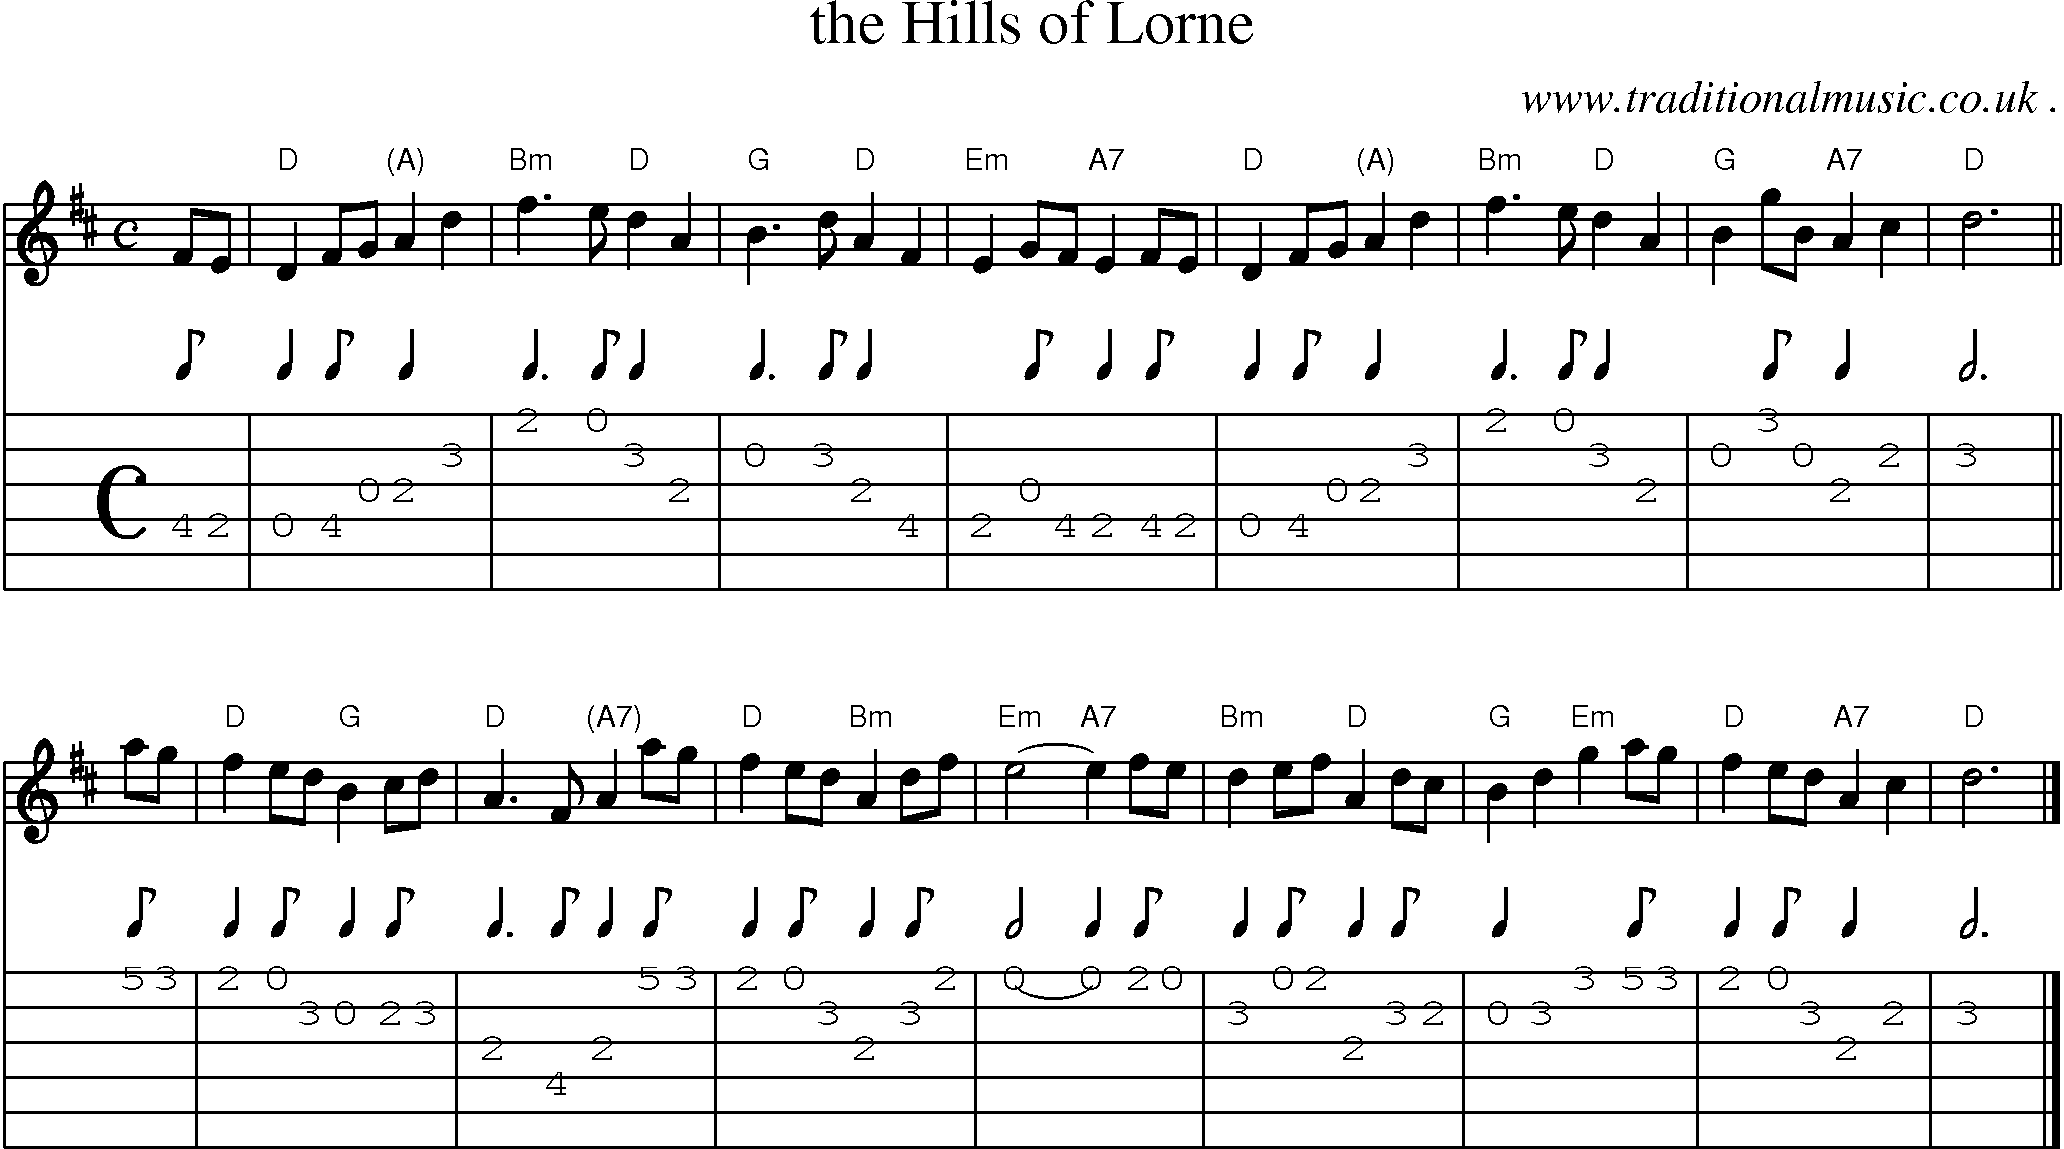 Sheet-music  score, Chords and Guitar Tabs for The Hills Of Lorne